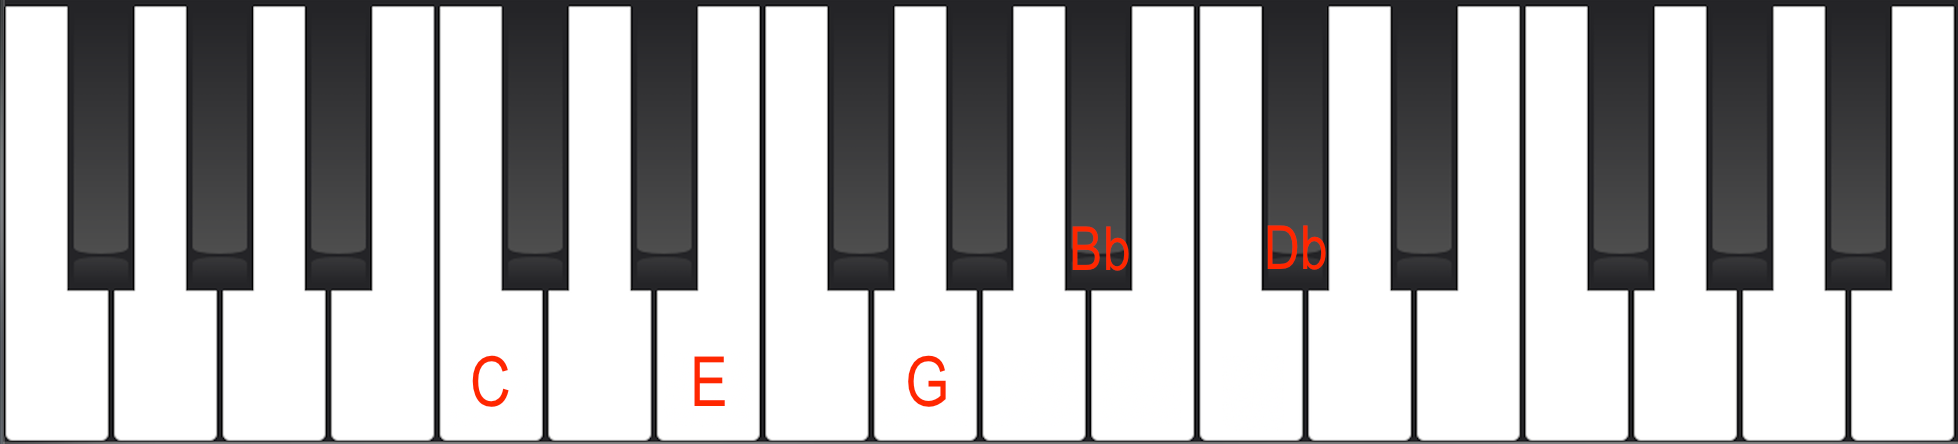 Piano voicing for close root position C7b9 chord